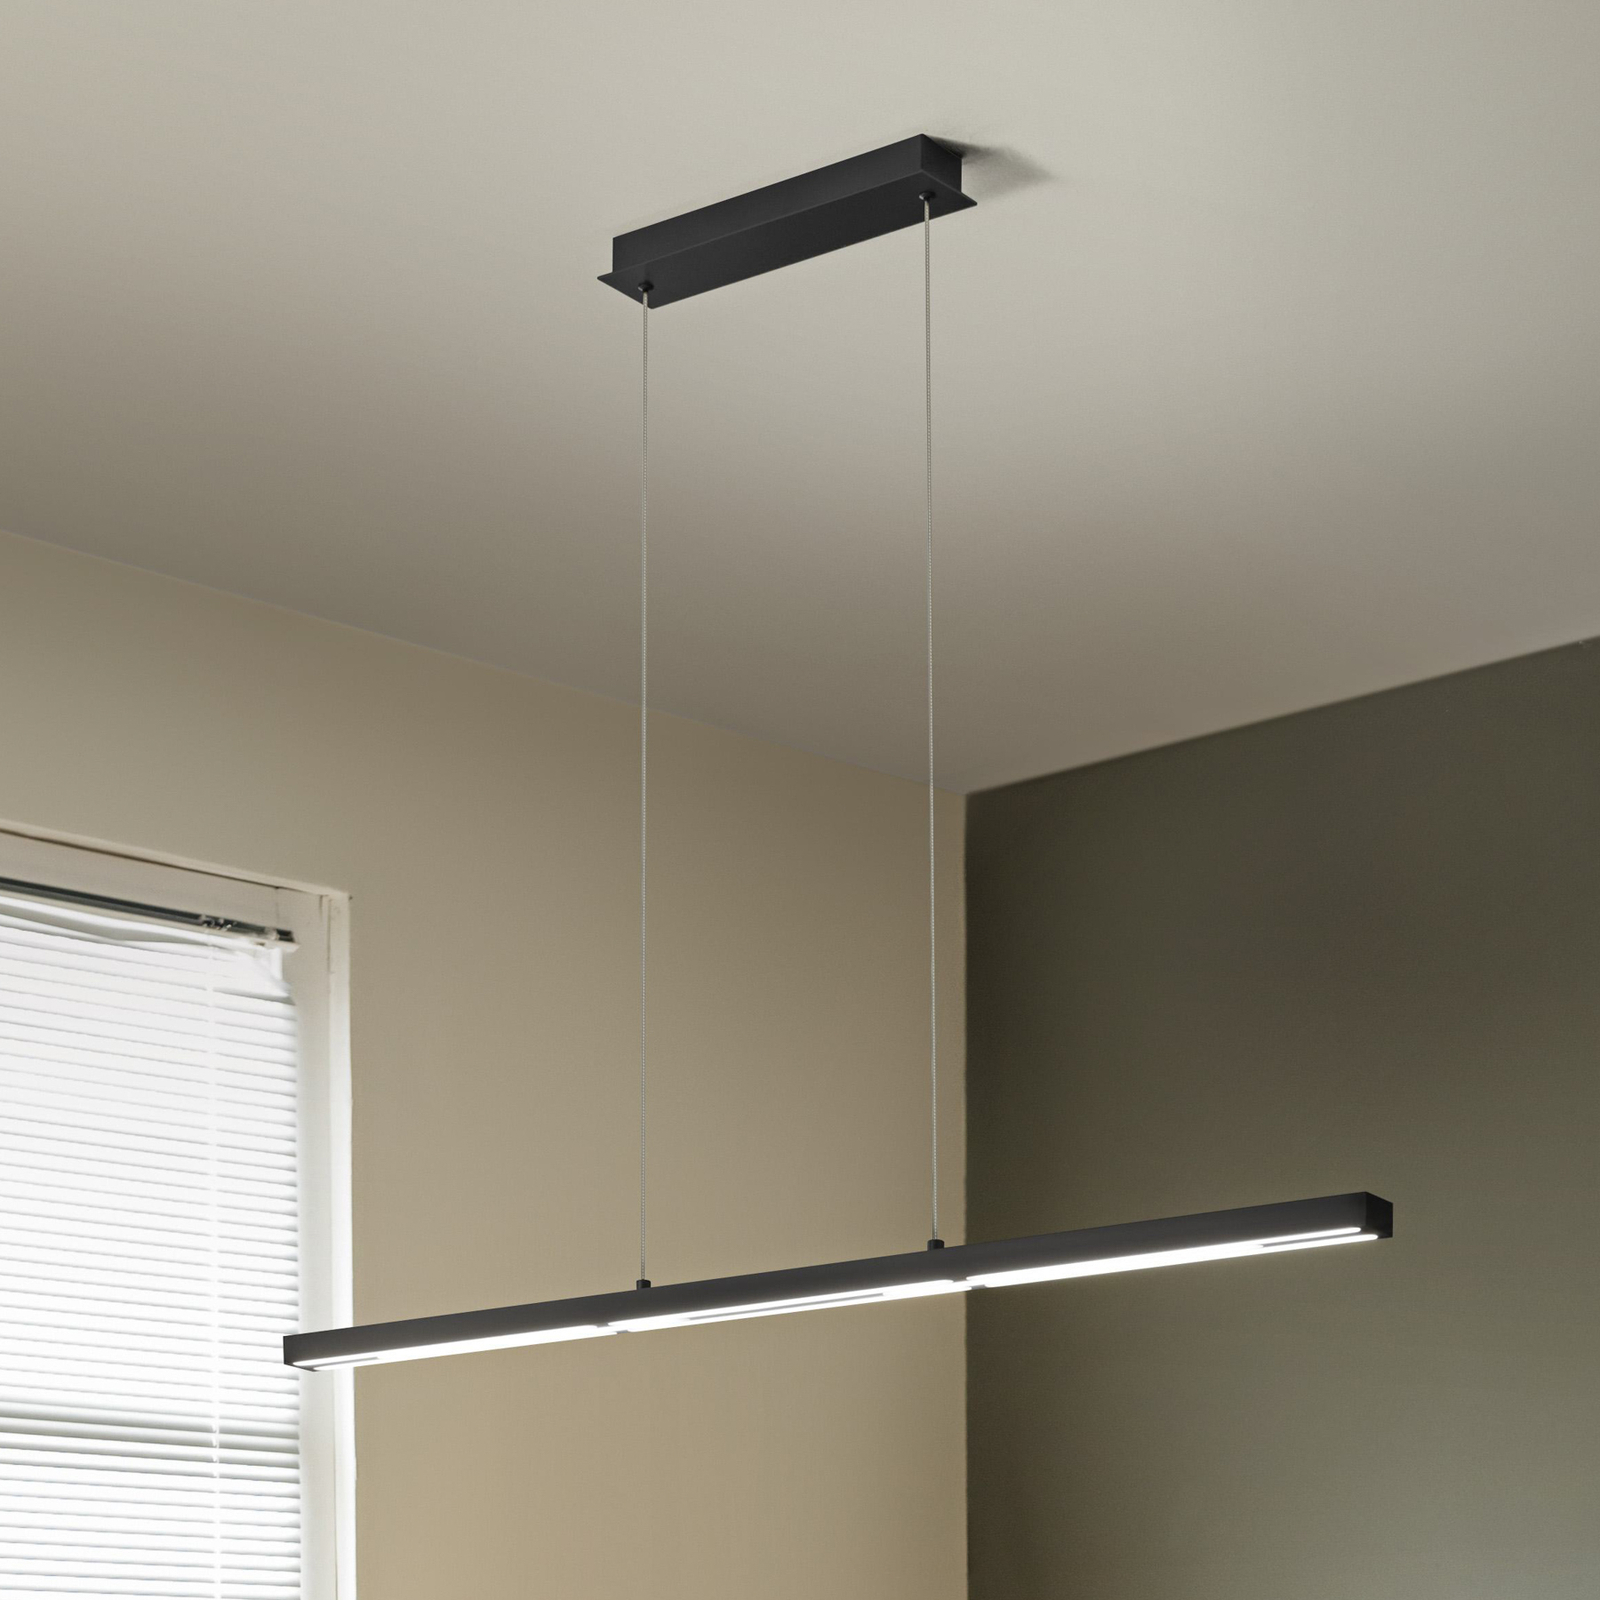 LED pendant light Ling, black, up- and downlight, dimmable